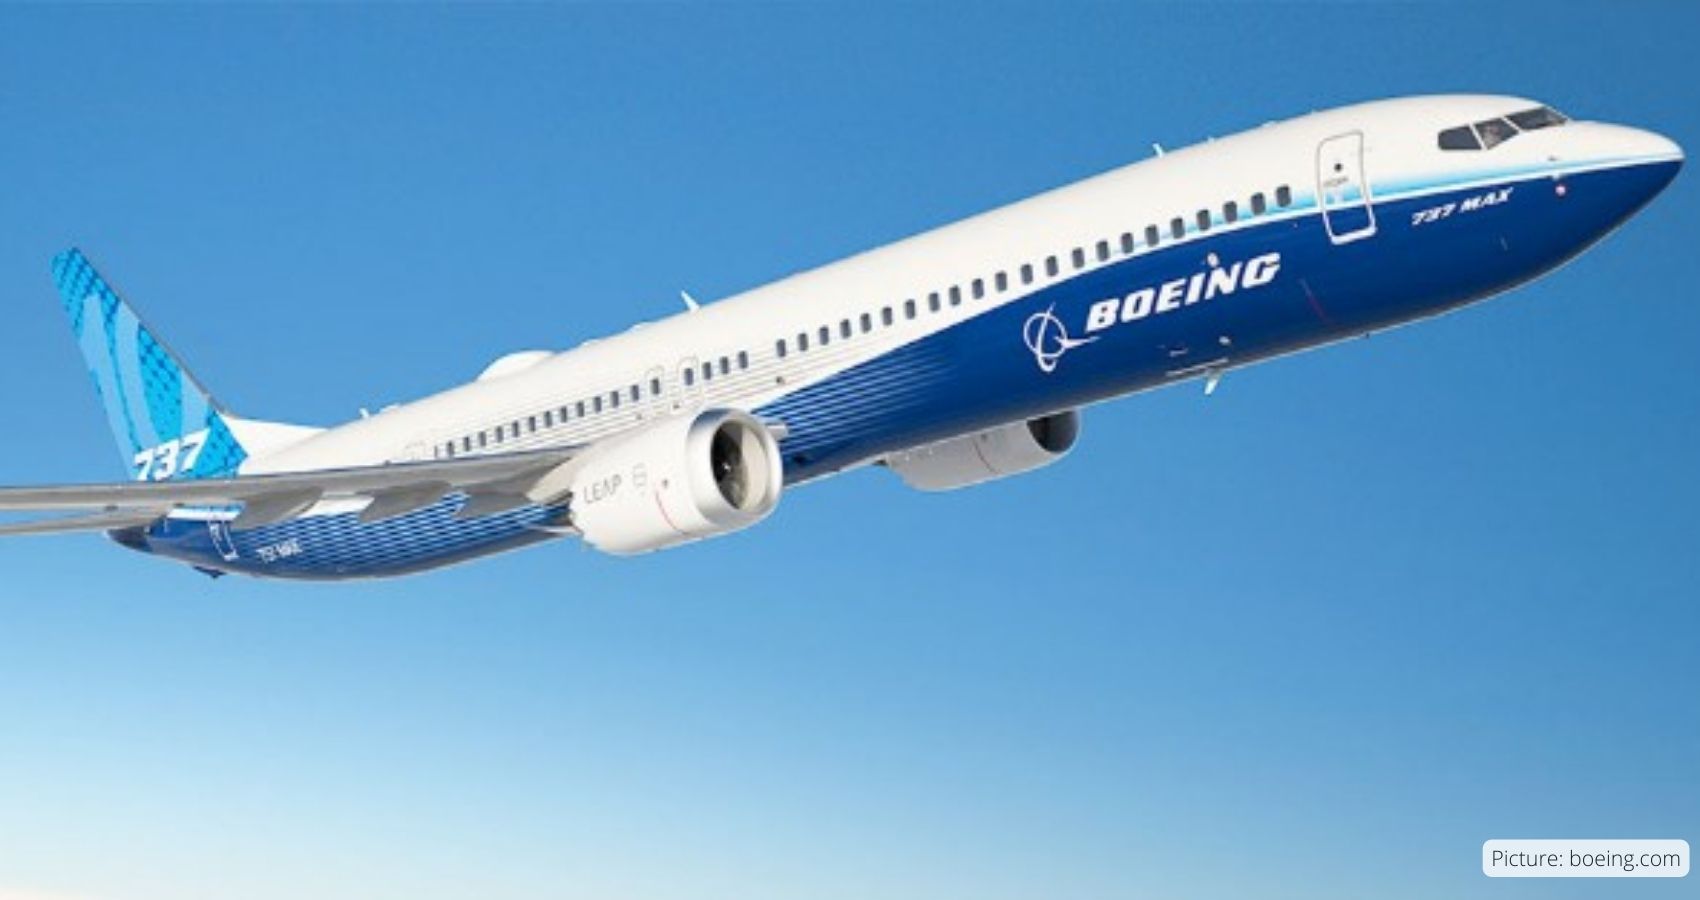 Boeing’s Precarious Plunge: From Industry Titan to Turbulent Troubles